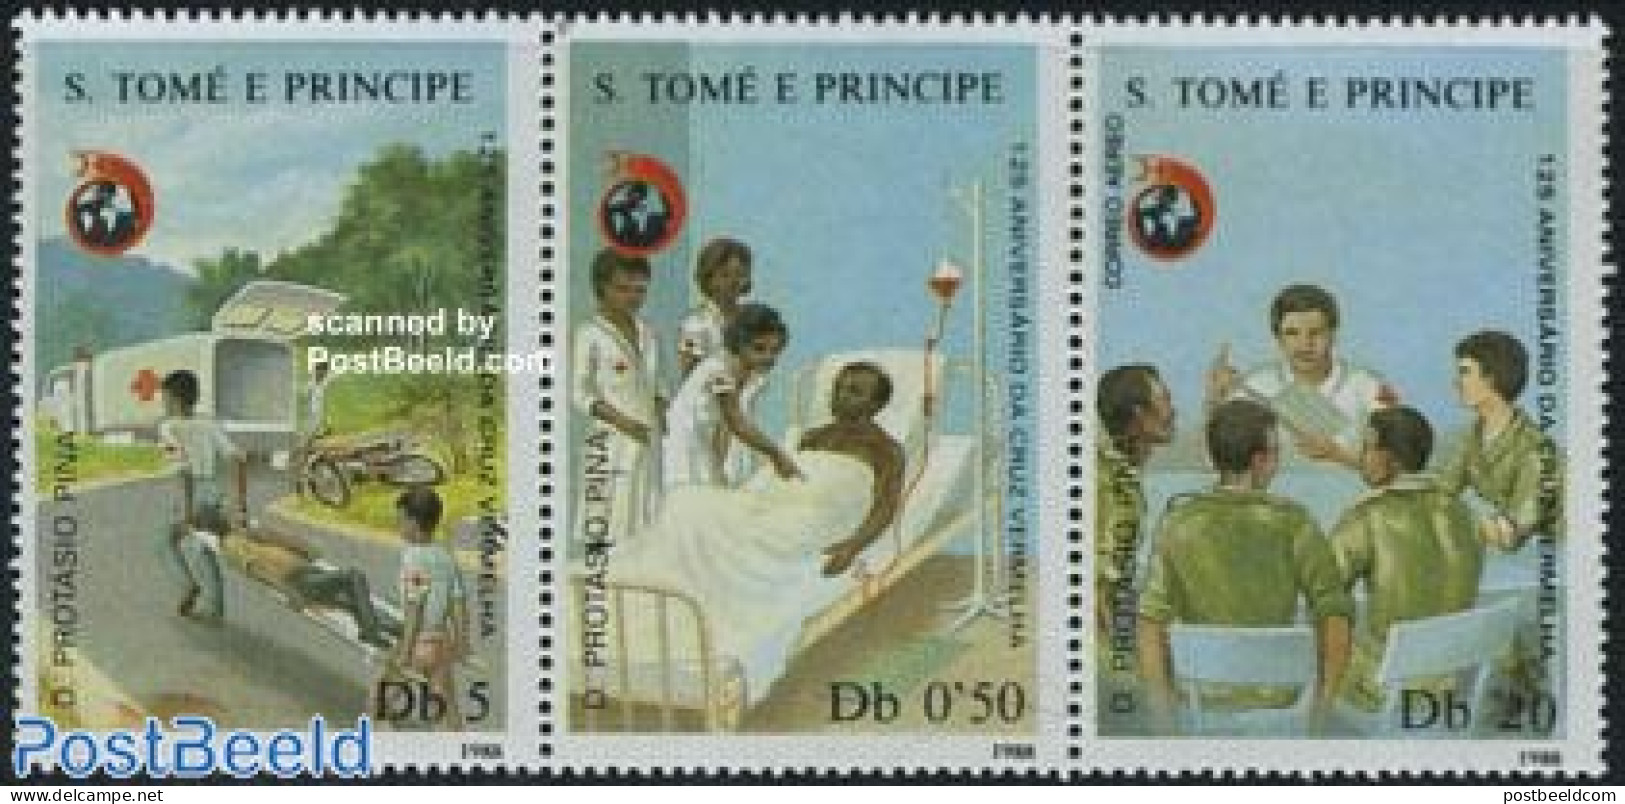 Sao Tome/Principe 1988 Red Cross 3v [::], Mint NH, Health - Transport - Red Cross - Motorcycles - Rotes Kreuz